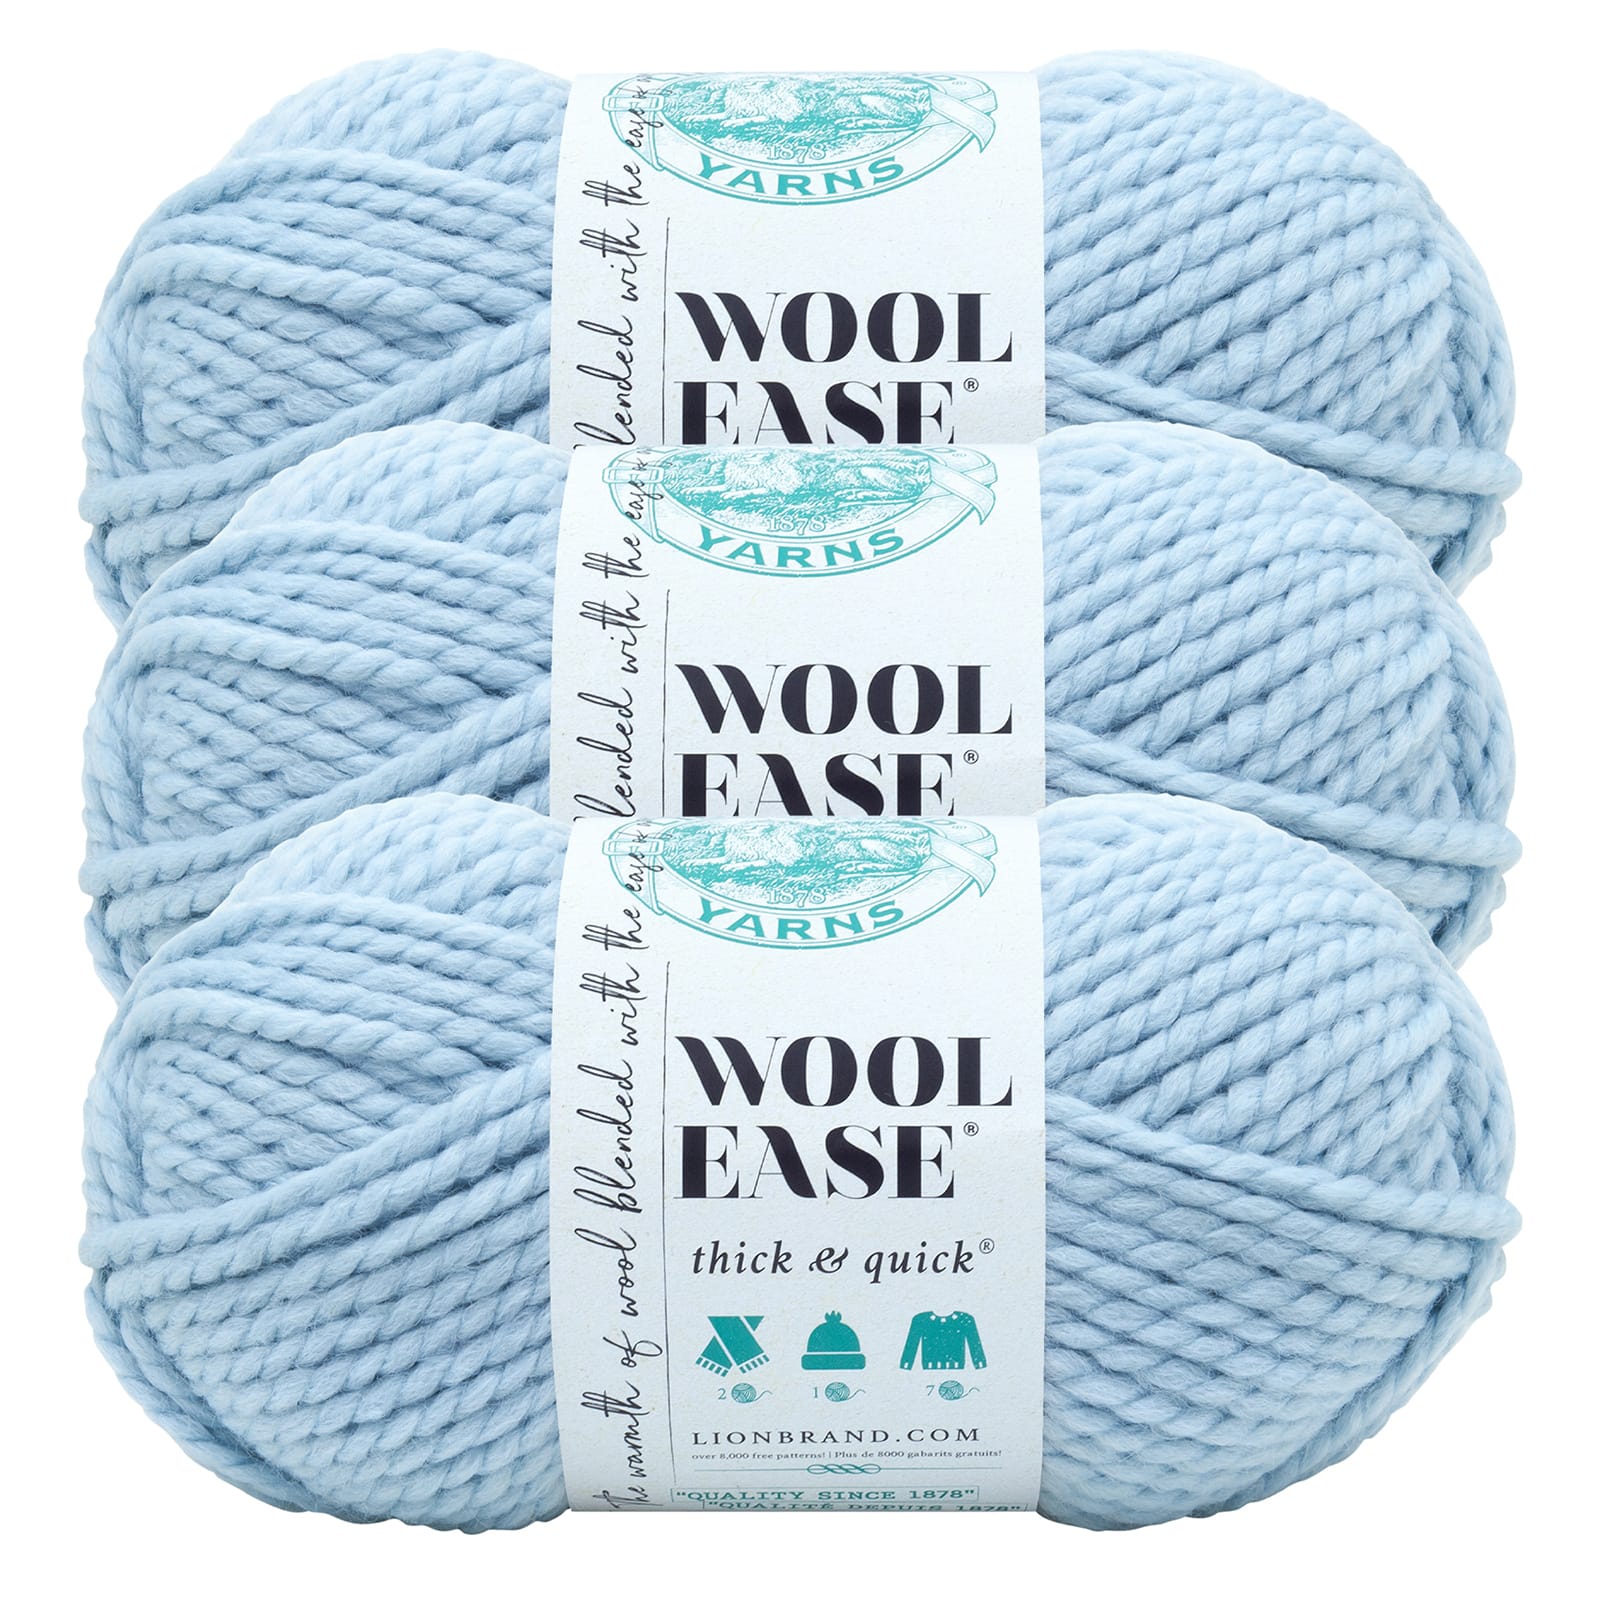 Lion Brand Wool-Ease Thick & Quick Yarn - Bluebird - 023032645179